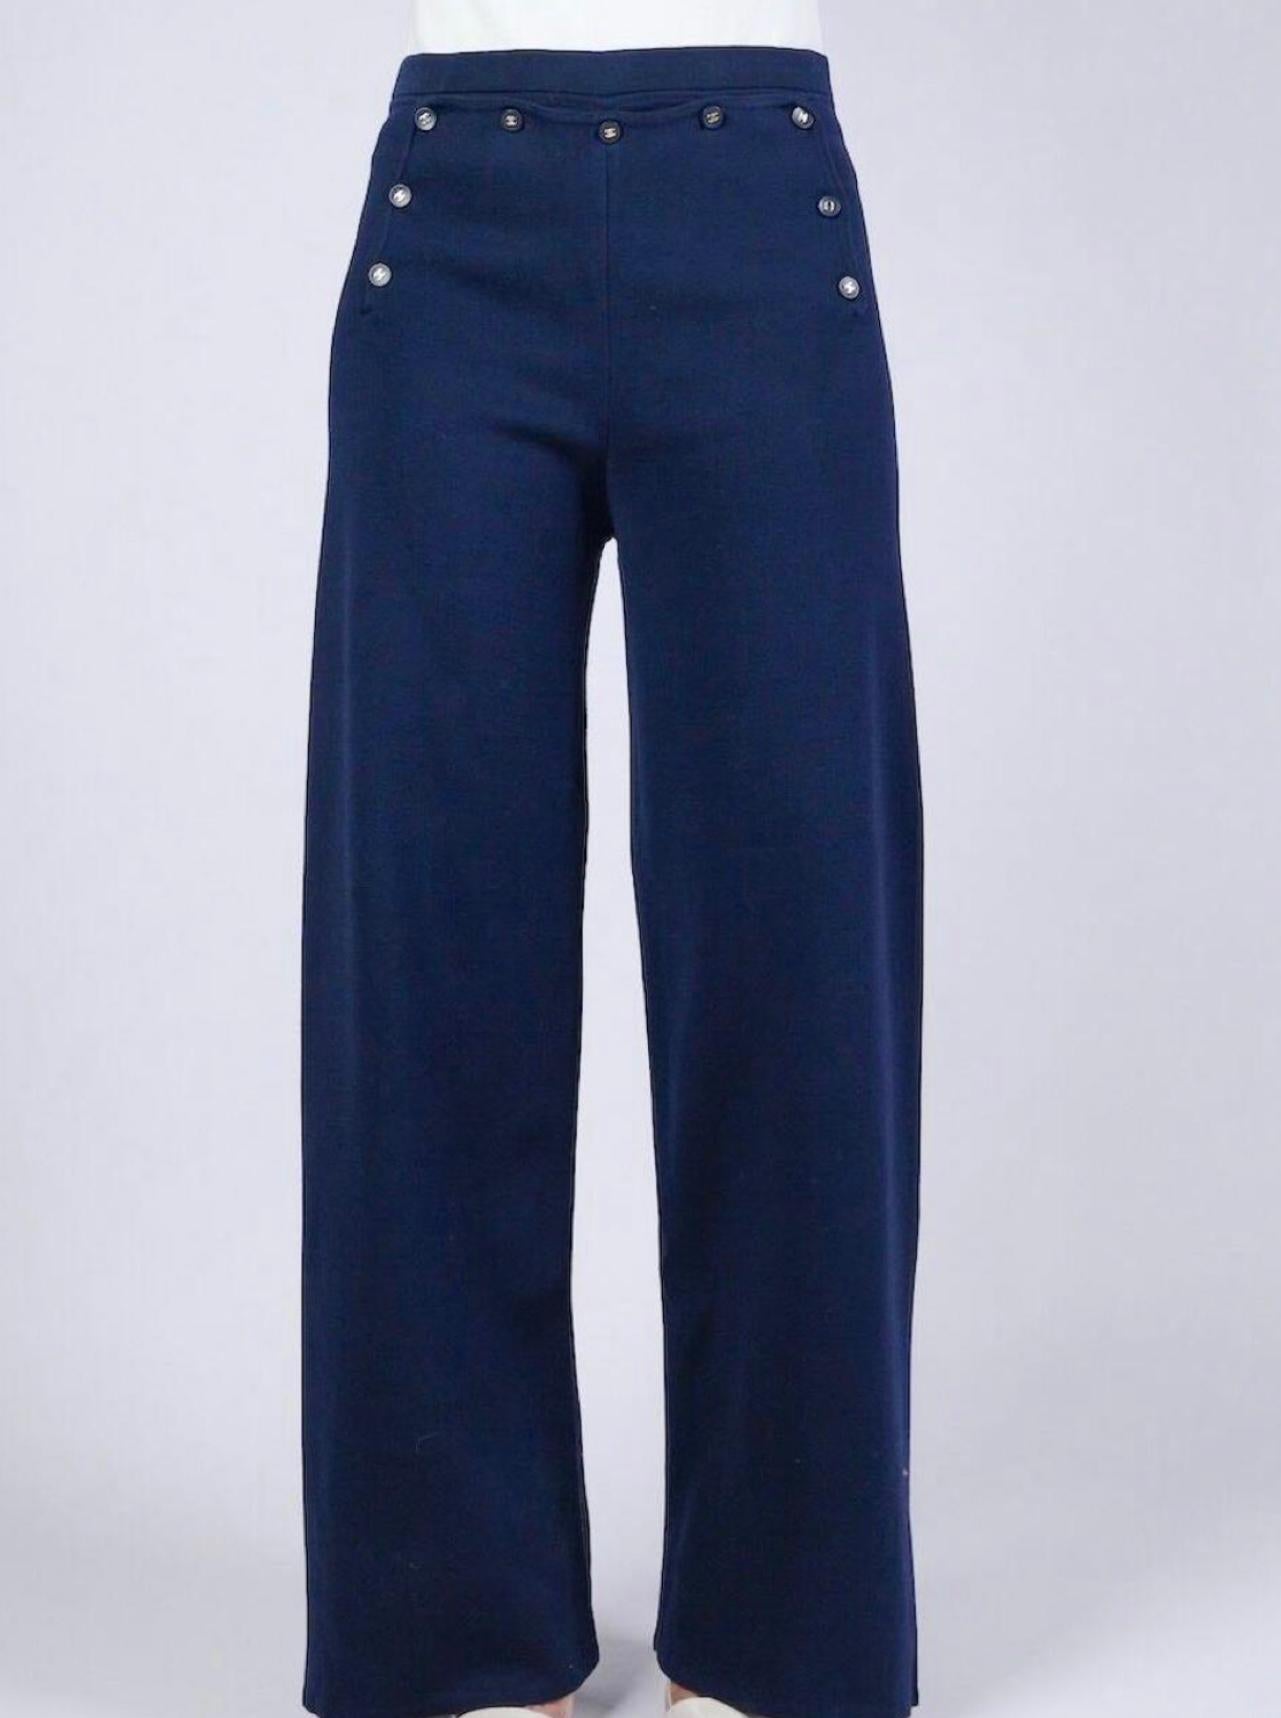 Chanel Rare 1994 Cindy Crawford Runway Trousers 1